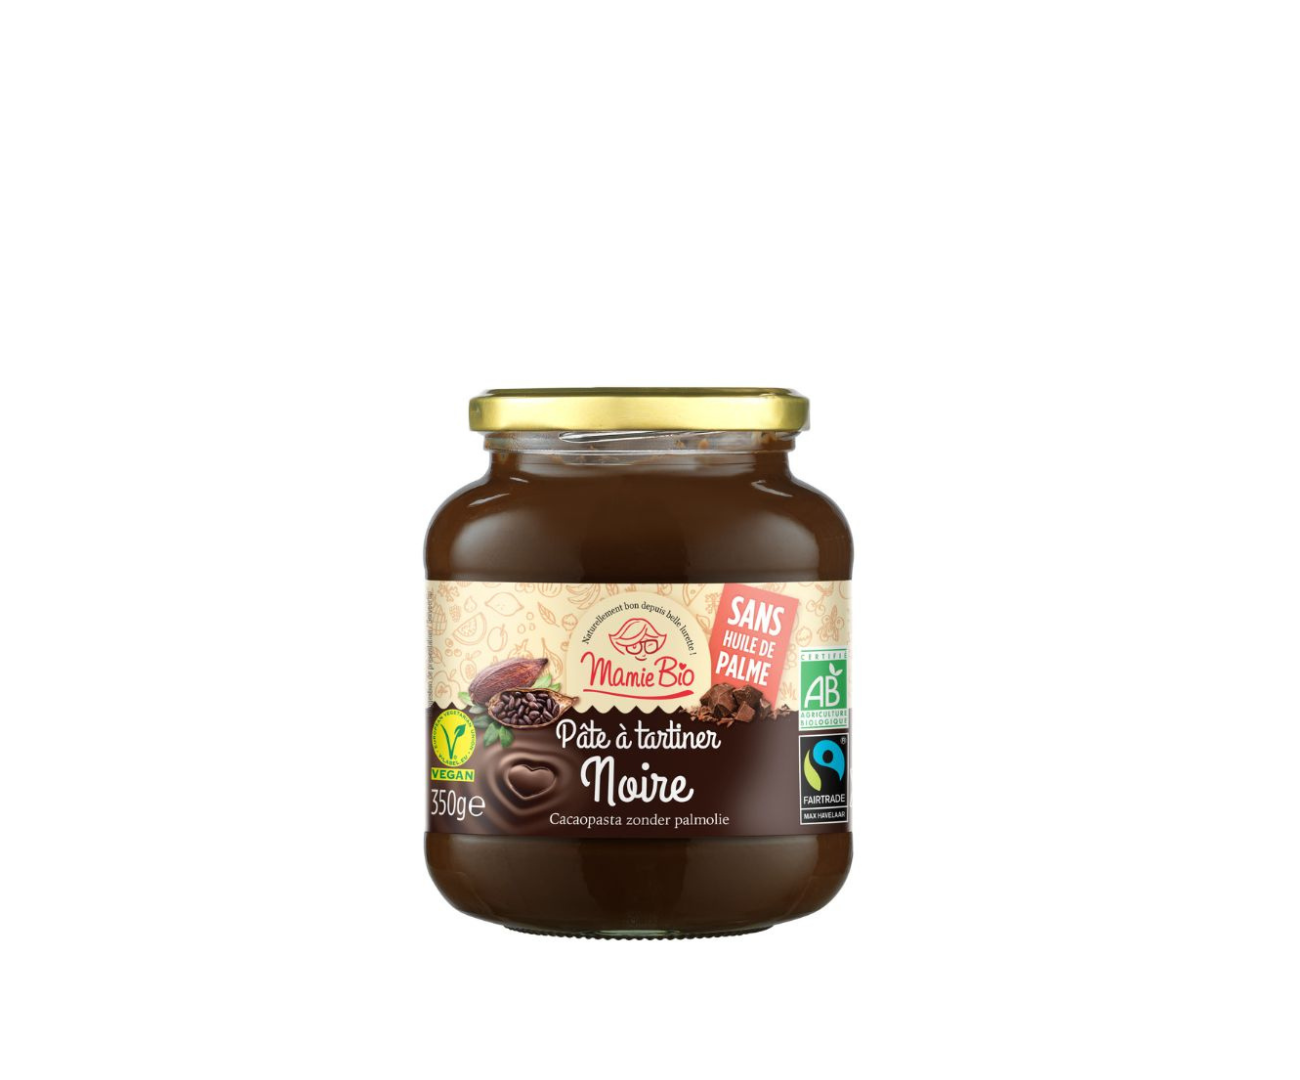 Pate a tartiner noire 350g